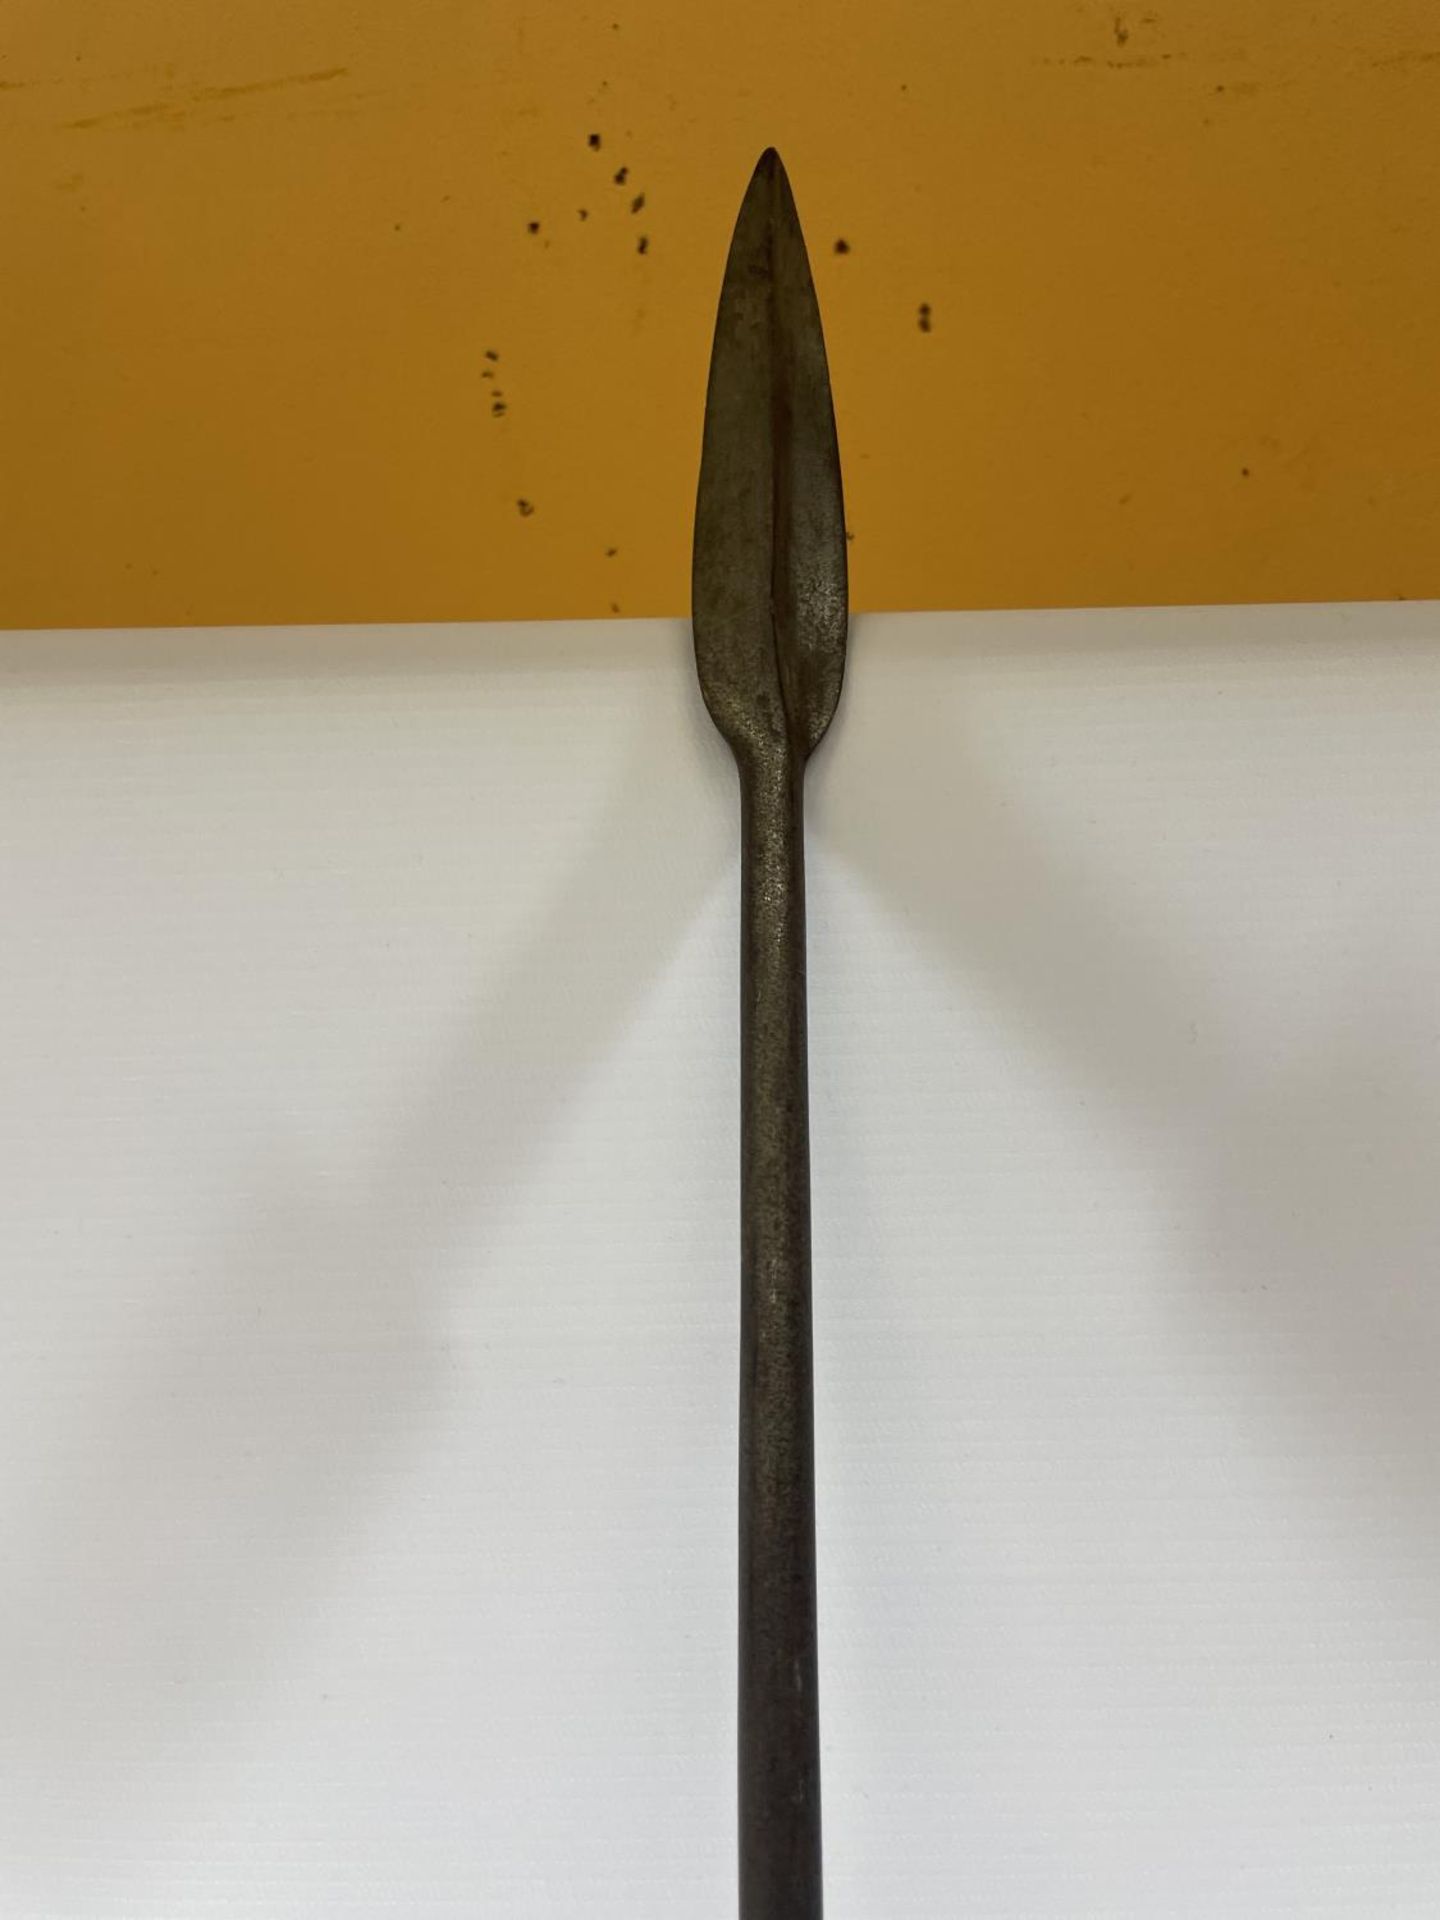 A LATE 19TH / EARLY 20TH CENTURY AFRICAN SPEAR, LENGTH 127CM - Image 2 of 3